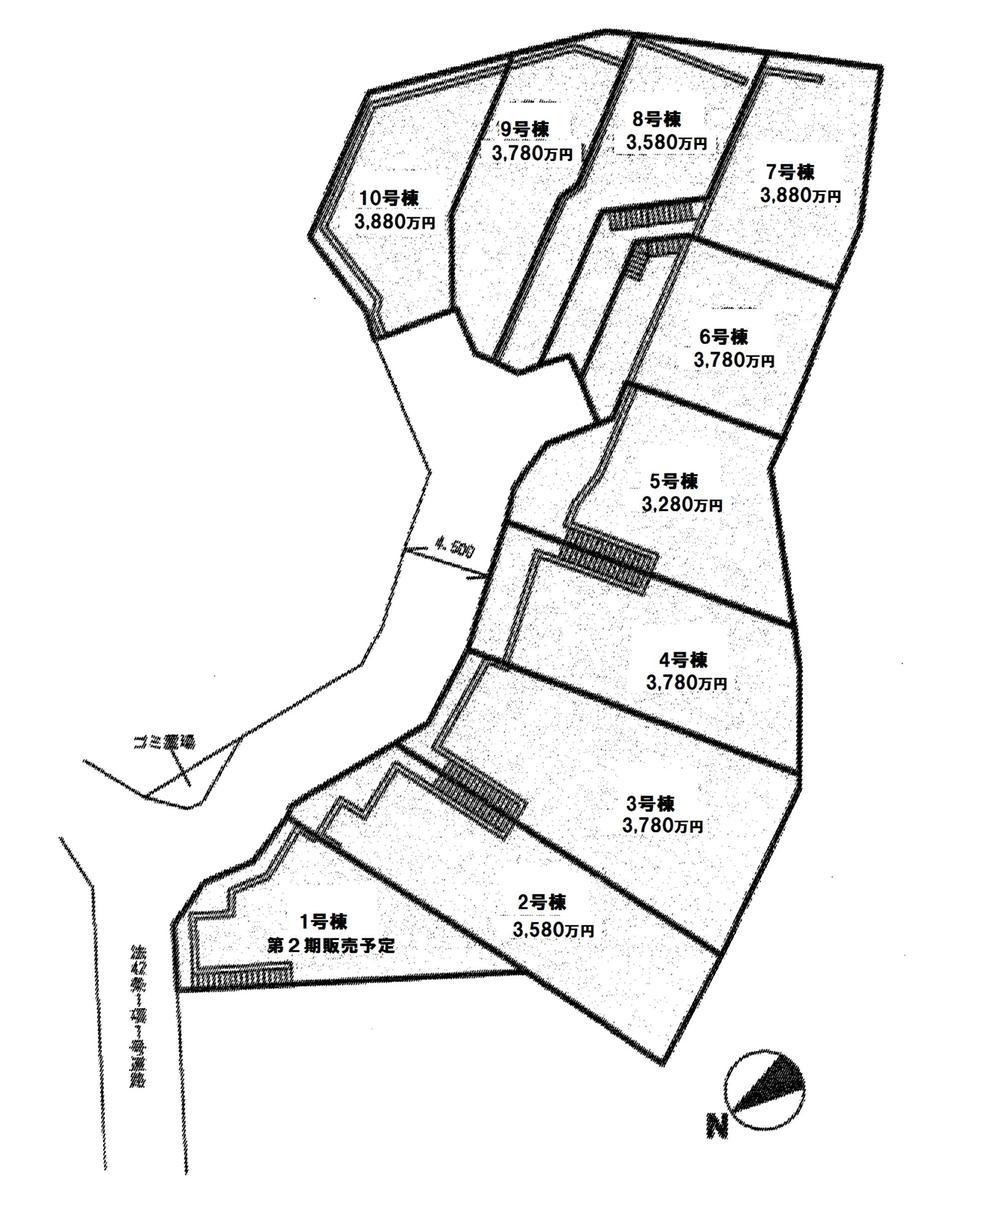 The entire compartment Figure. All 10 buildings of the large subdivision ・ This selling 9 buildings